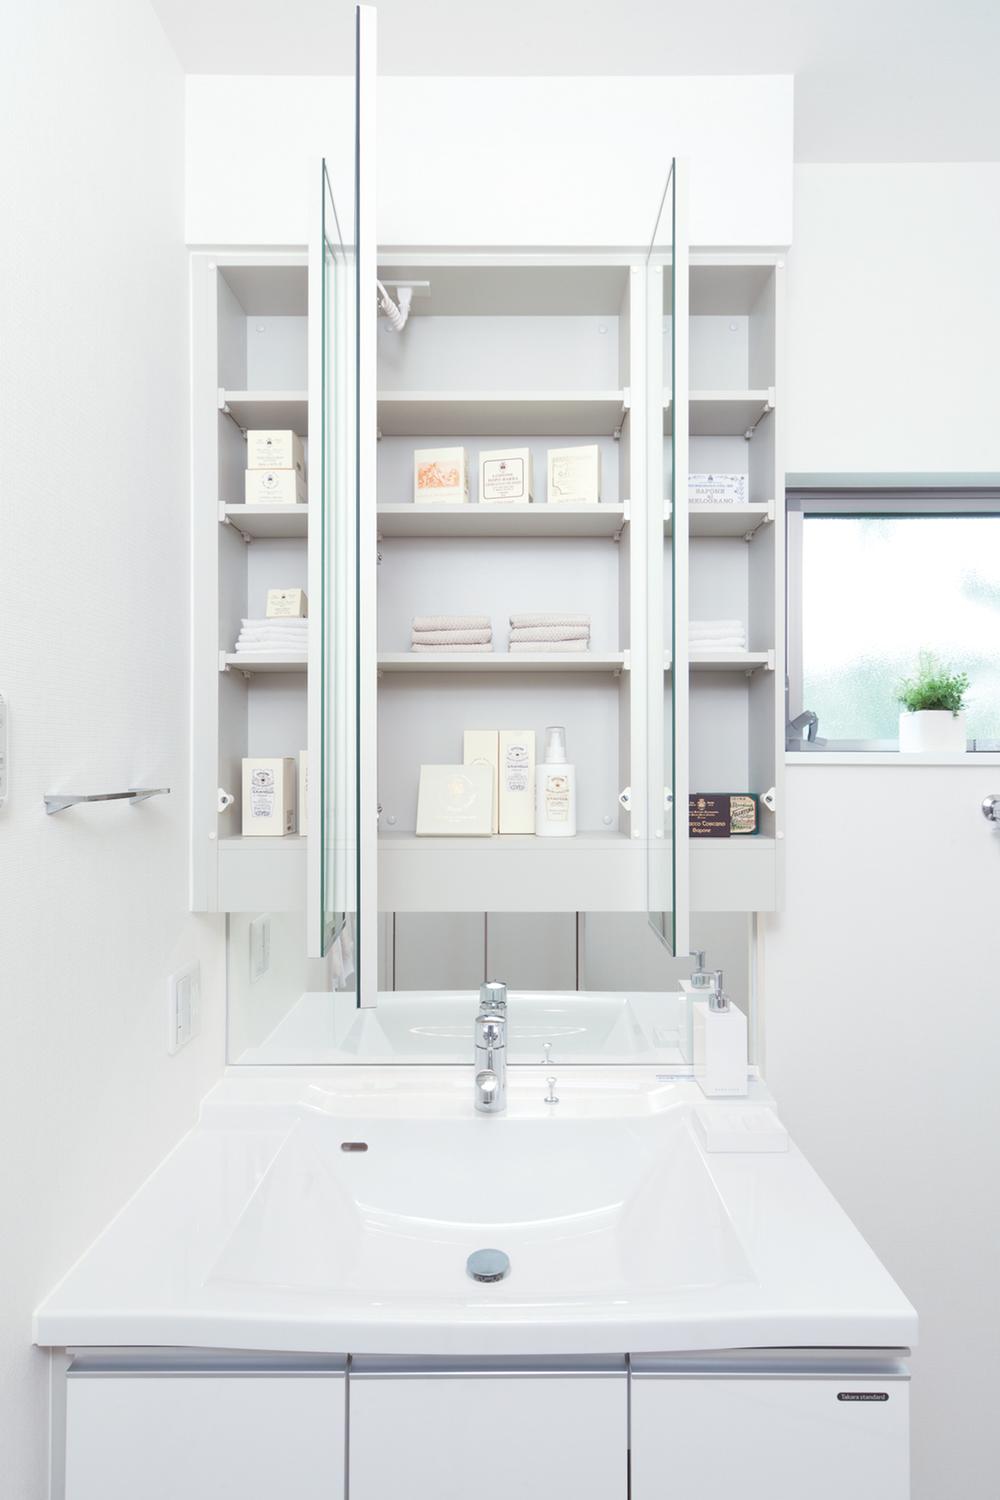 Other Equipment. Such as toiletries and makeup items you can organize clutter in the back of the storage space of the easy-to-read large triple mirror.